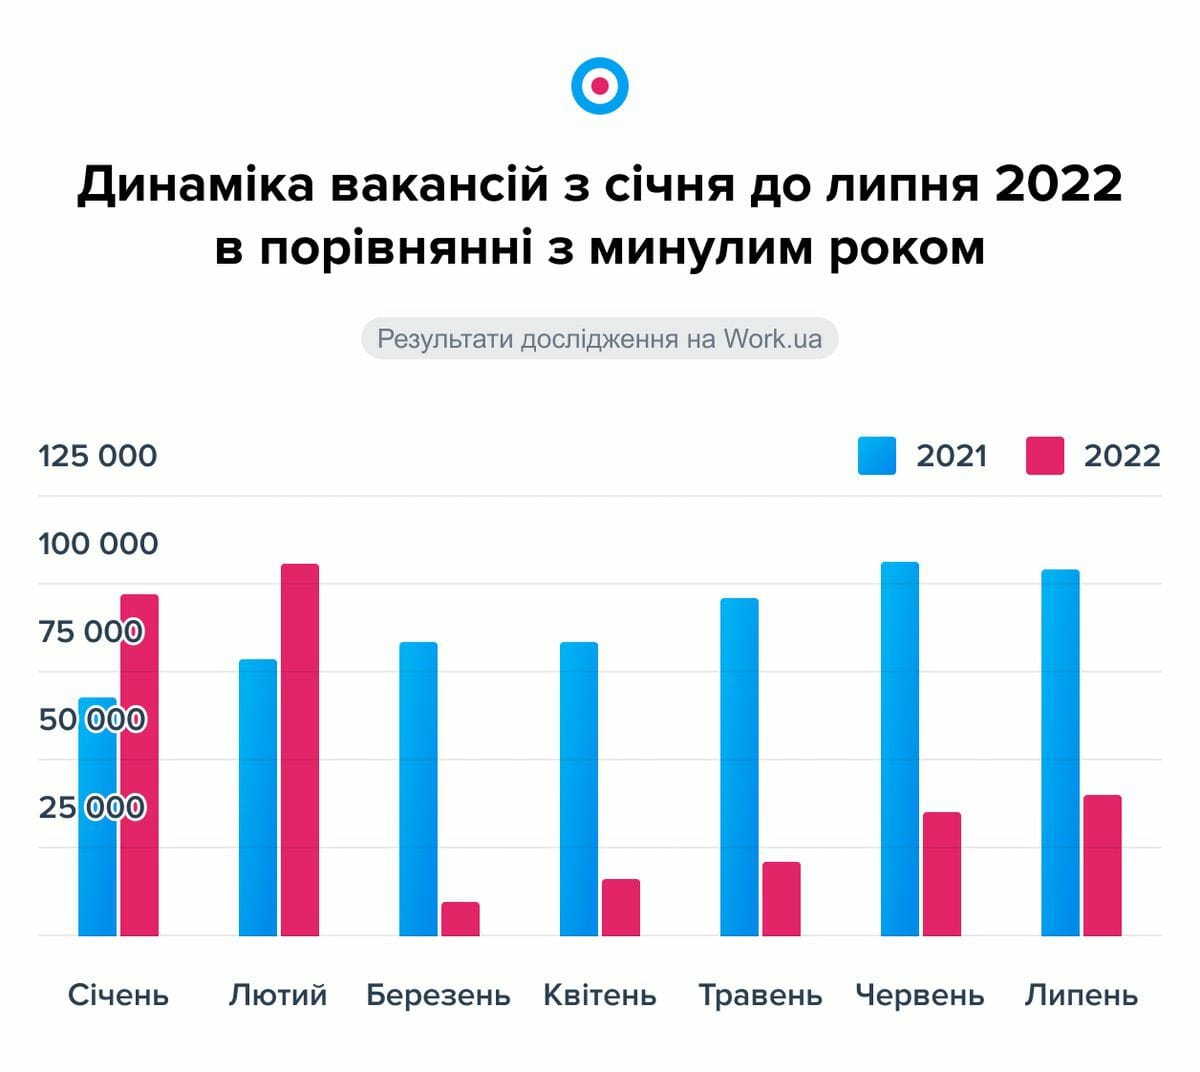 Not only IT: according to Work.ua, the labor market grew by 14% in July